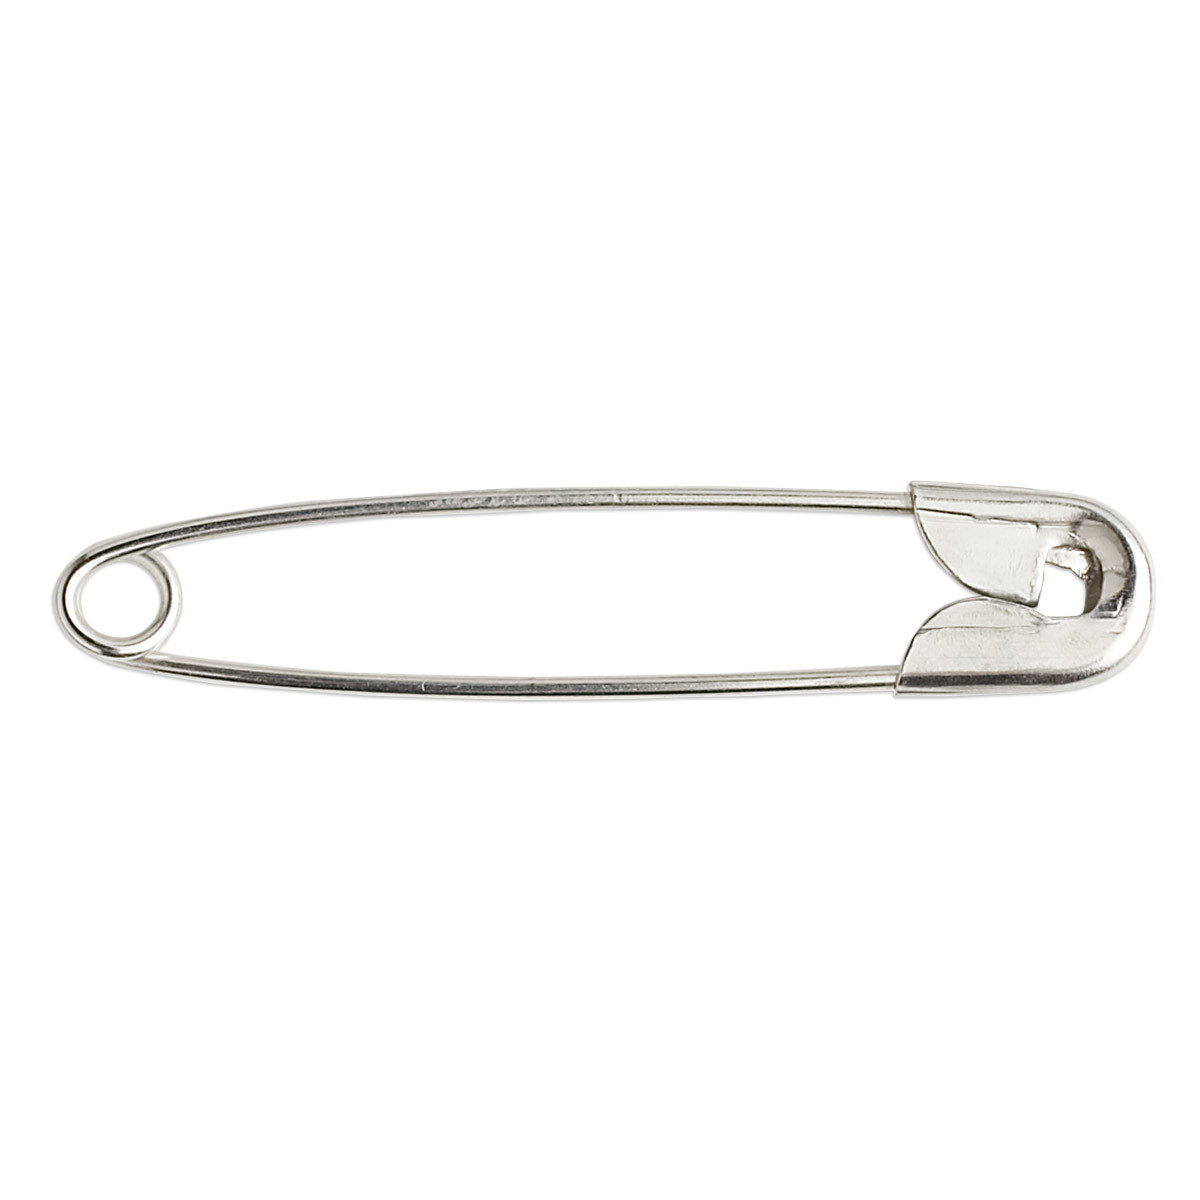 Safety Pins
 Safety pin silver finished steel 1 3 4 inch Sold per